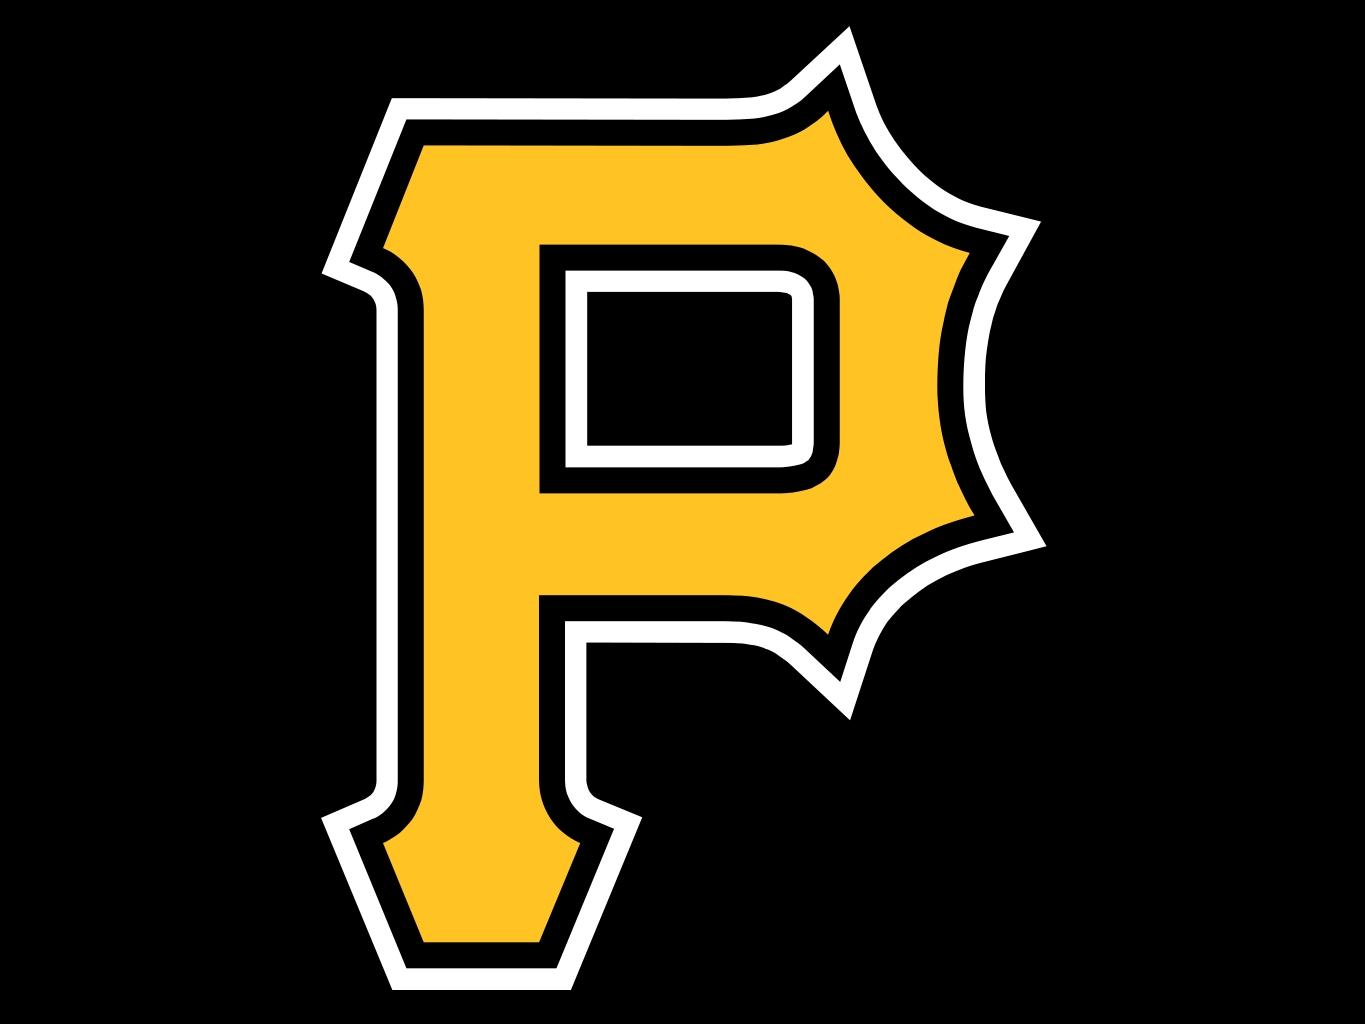 The Pittsburgh Pirates are FOR REAL!